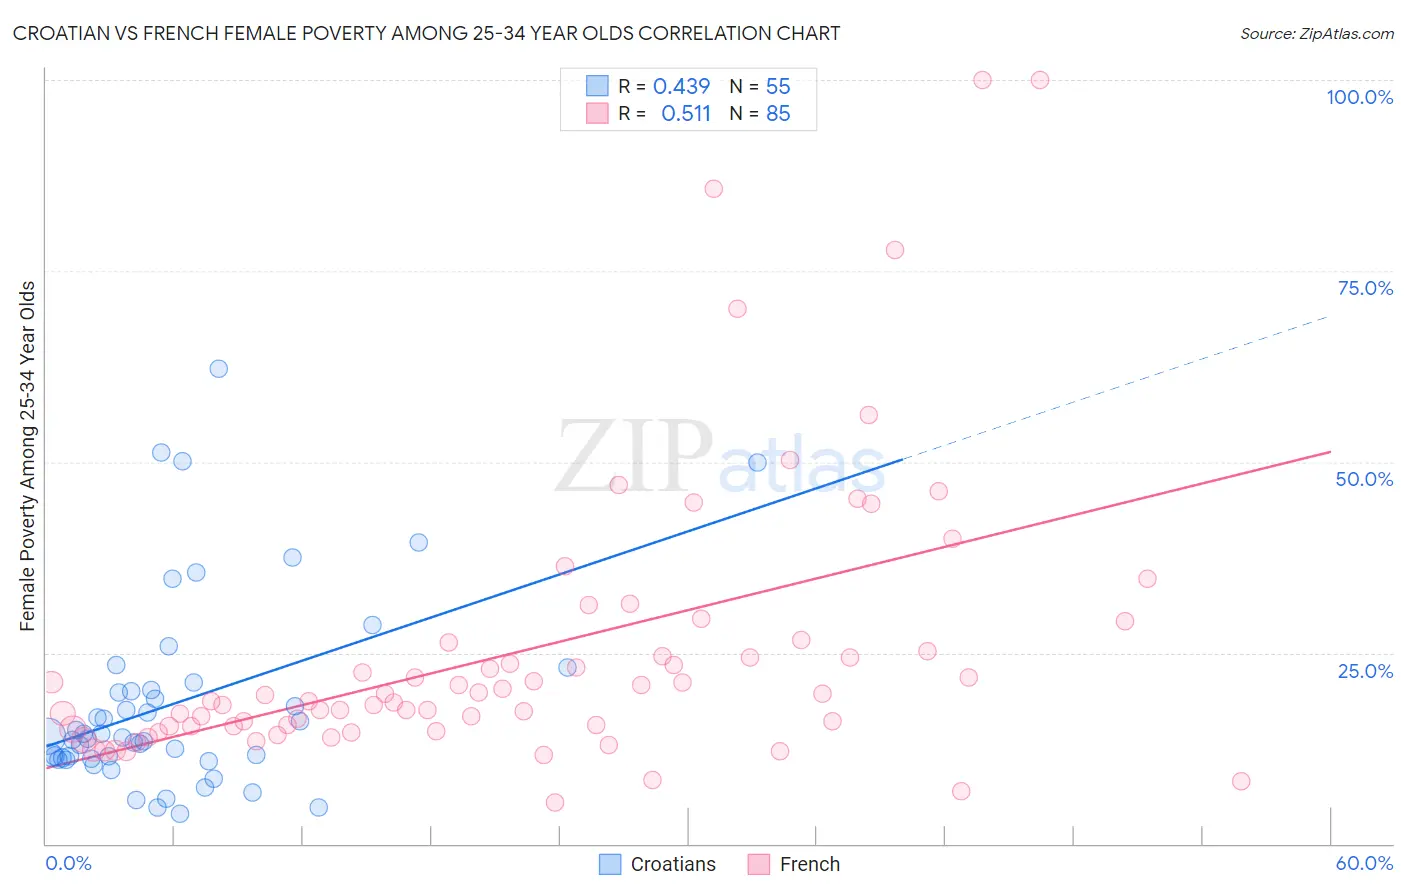 Croatian vs French Female Poverty Among 25-34 Year Olds